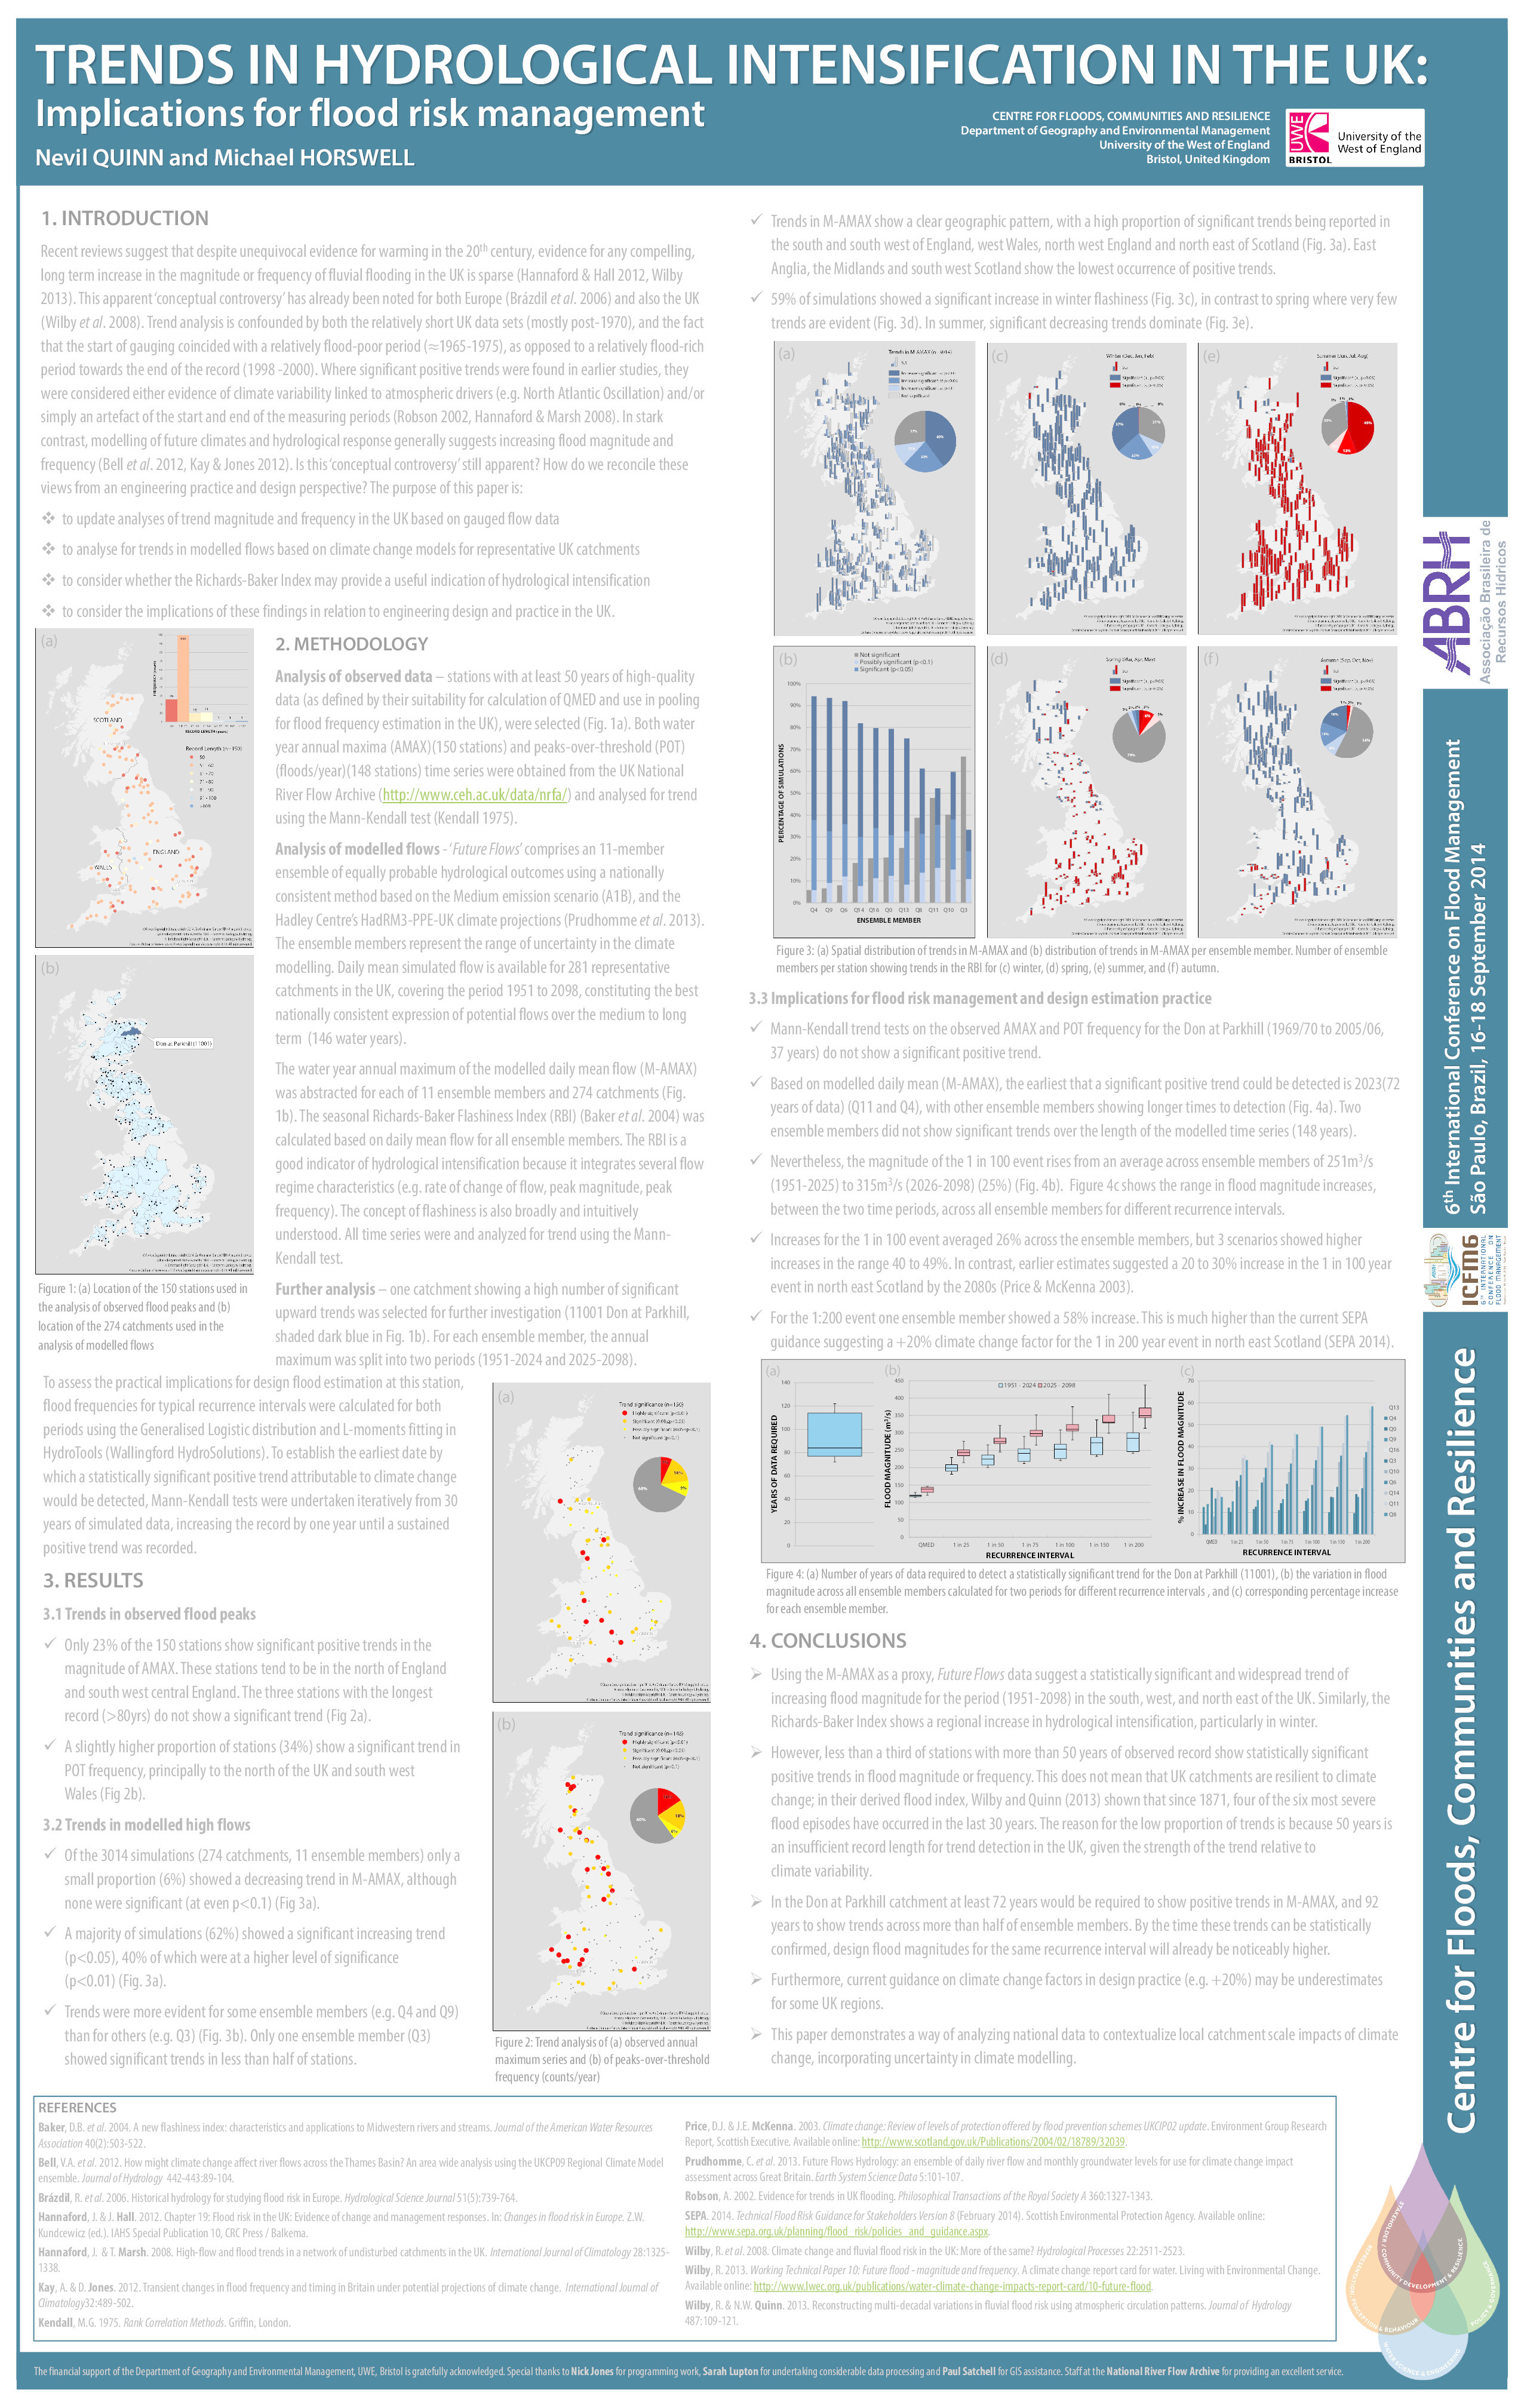 Trends in hydrological intensification in the UK: Implications for flood risk management Thumbnail